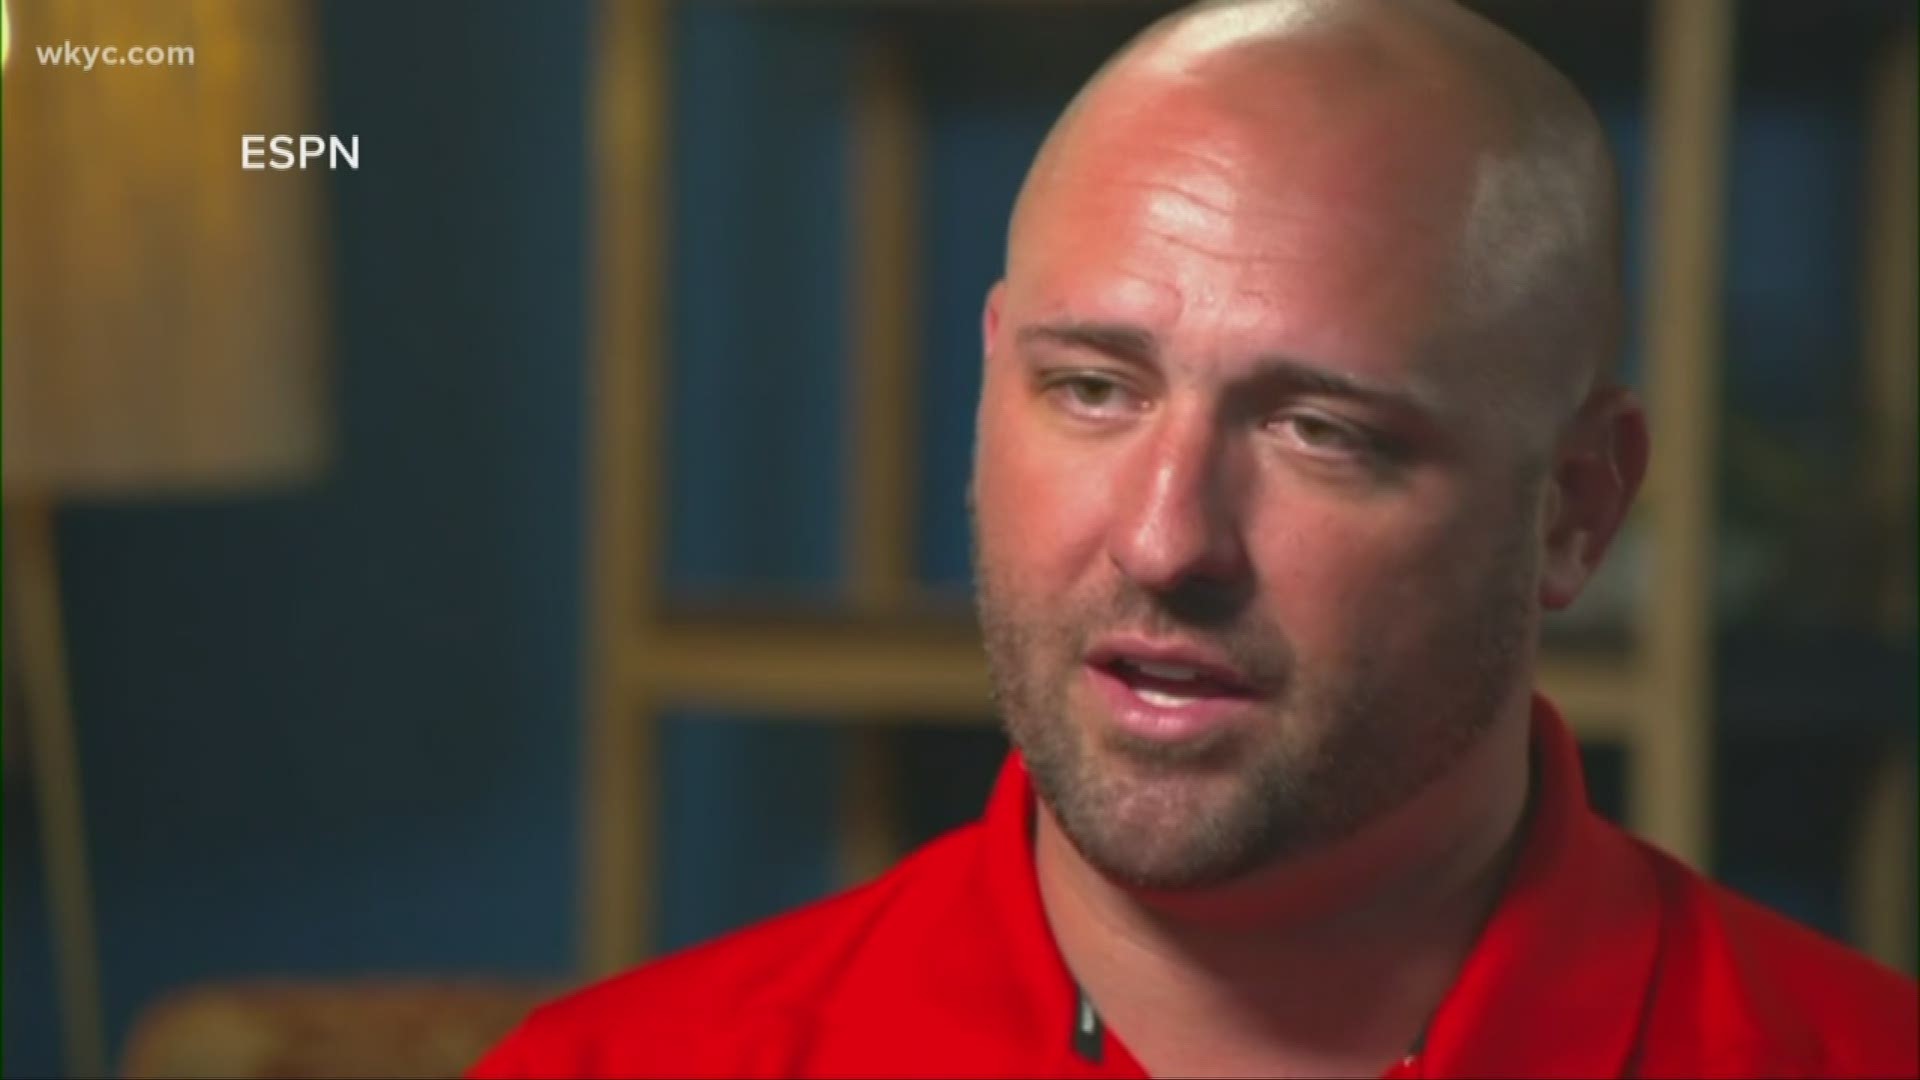 Former Ohio State assistant Zach Smith breaks silence on domestic abuse